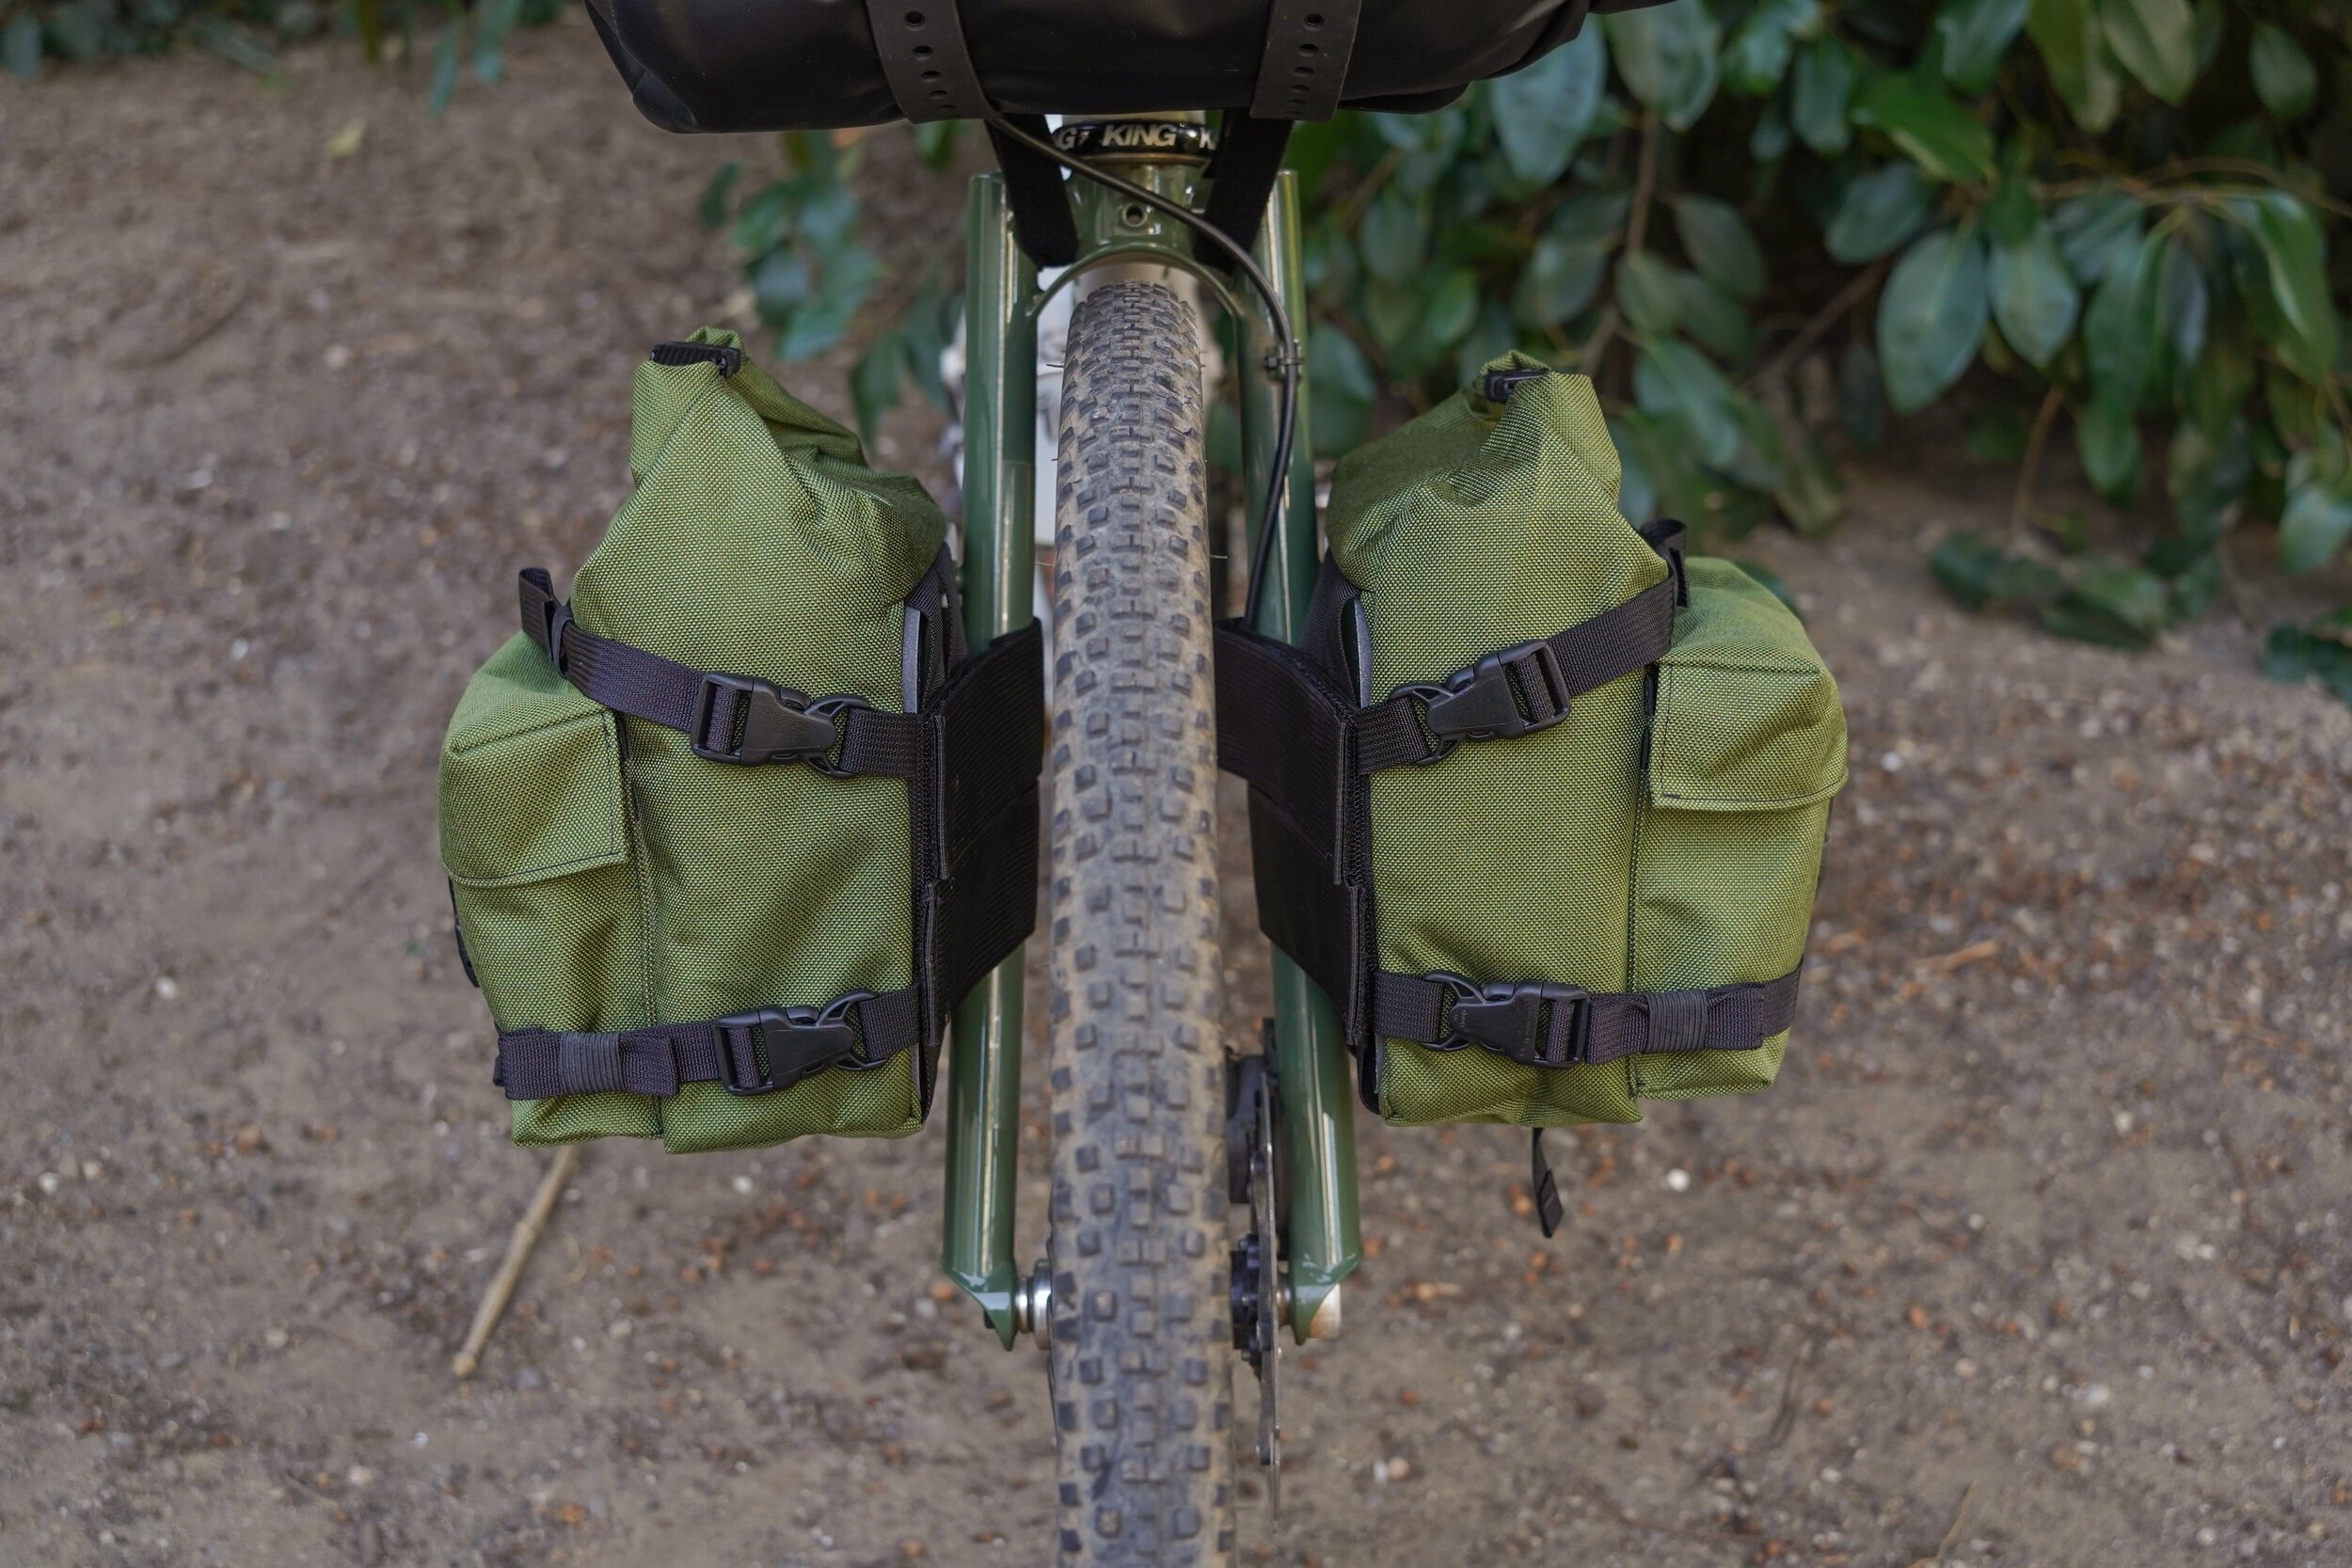 Pico Panniers Small Touring Panniers - Outer Shell Bike Bags